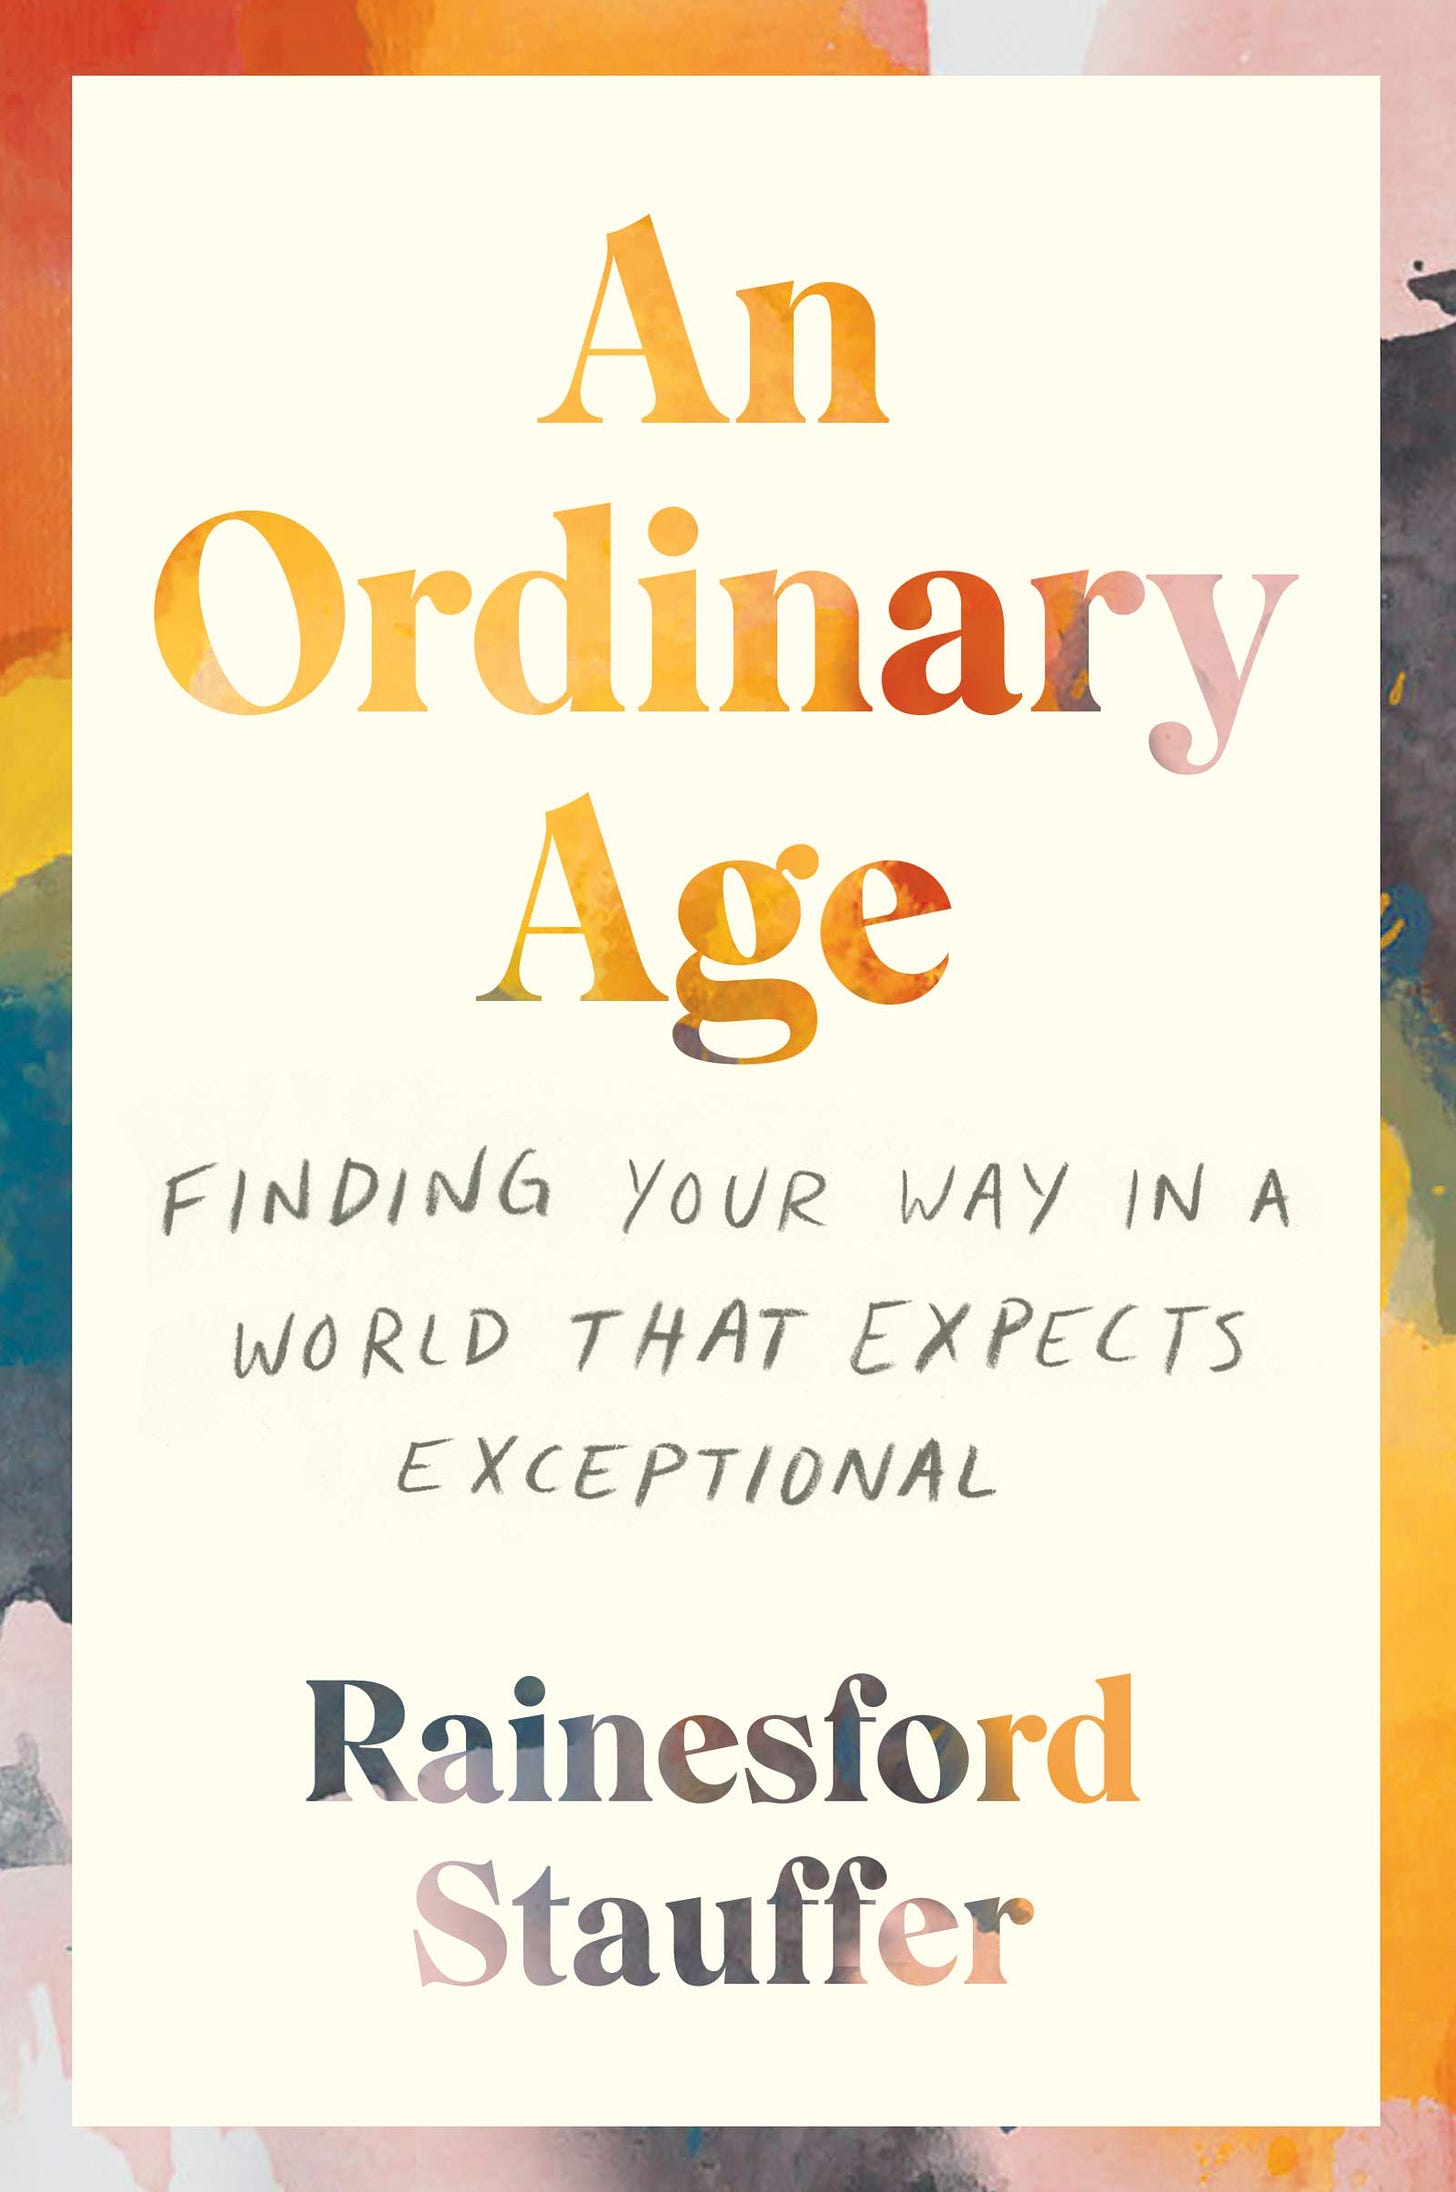 Cover of the book "An Ordinary Age" by Rainesford Stauffer